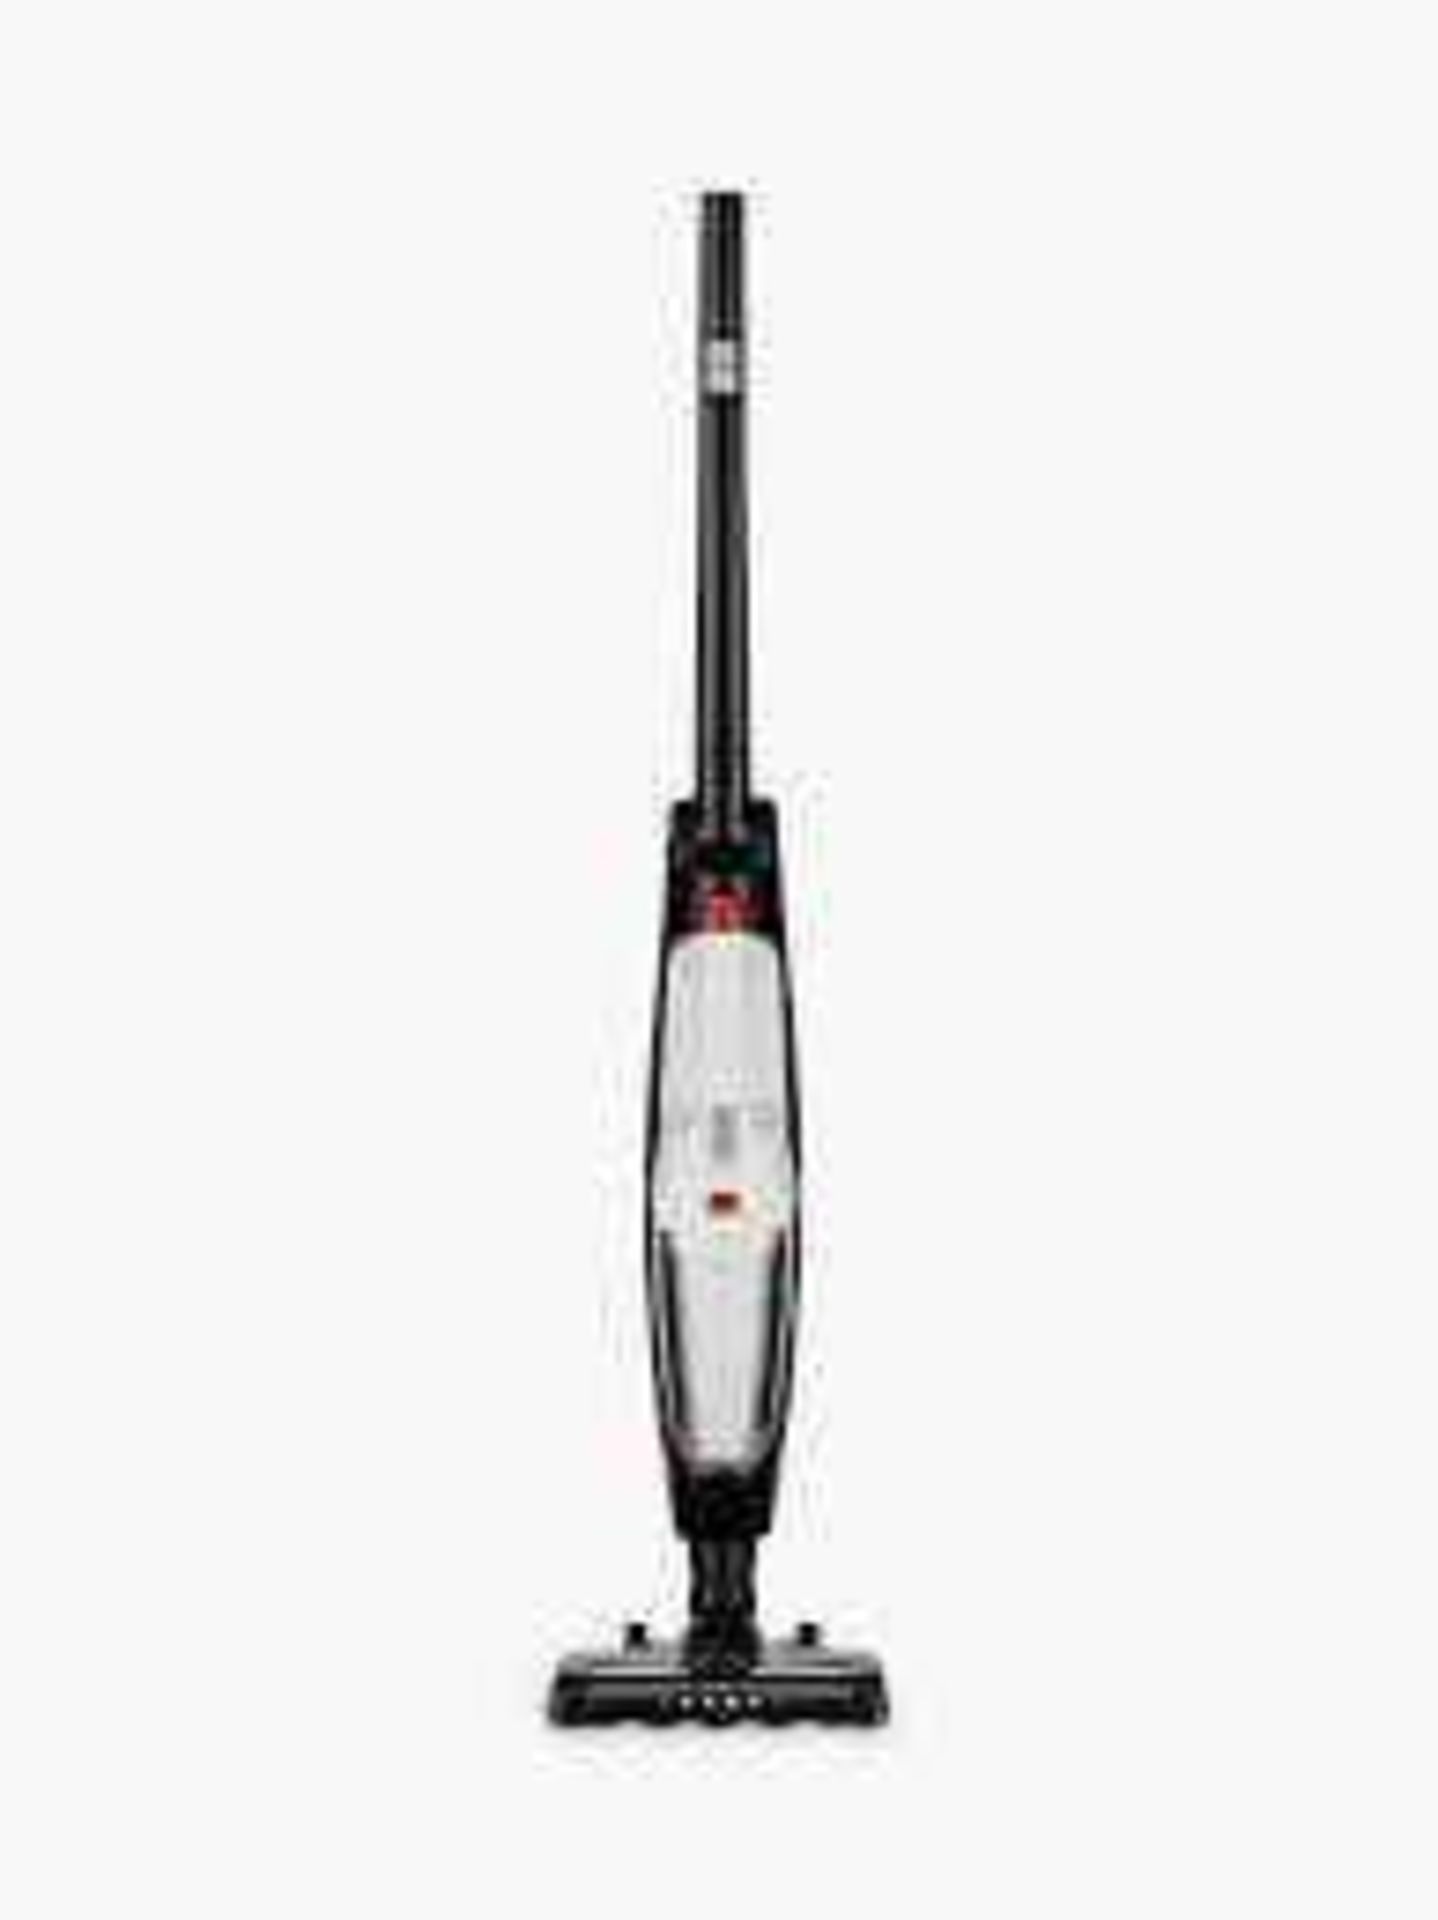 Combined RRP £200 Lot To Contain Two Bagged John Lewis 2 In 1 Cordless Vacuum Cleaners - Image 2 of 2